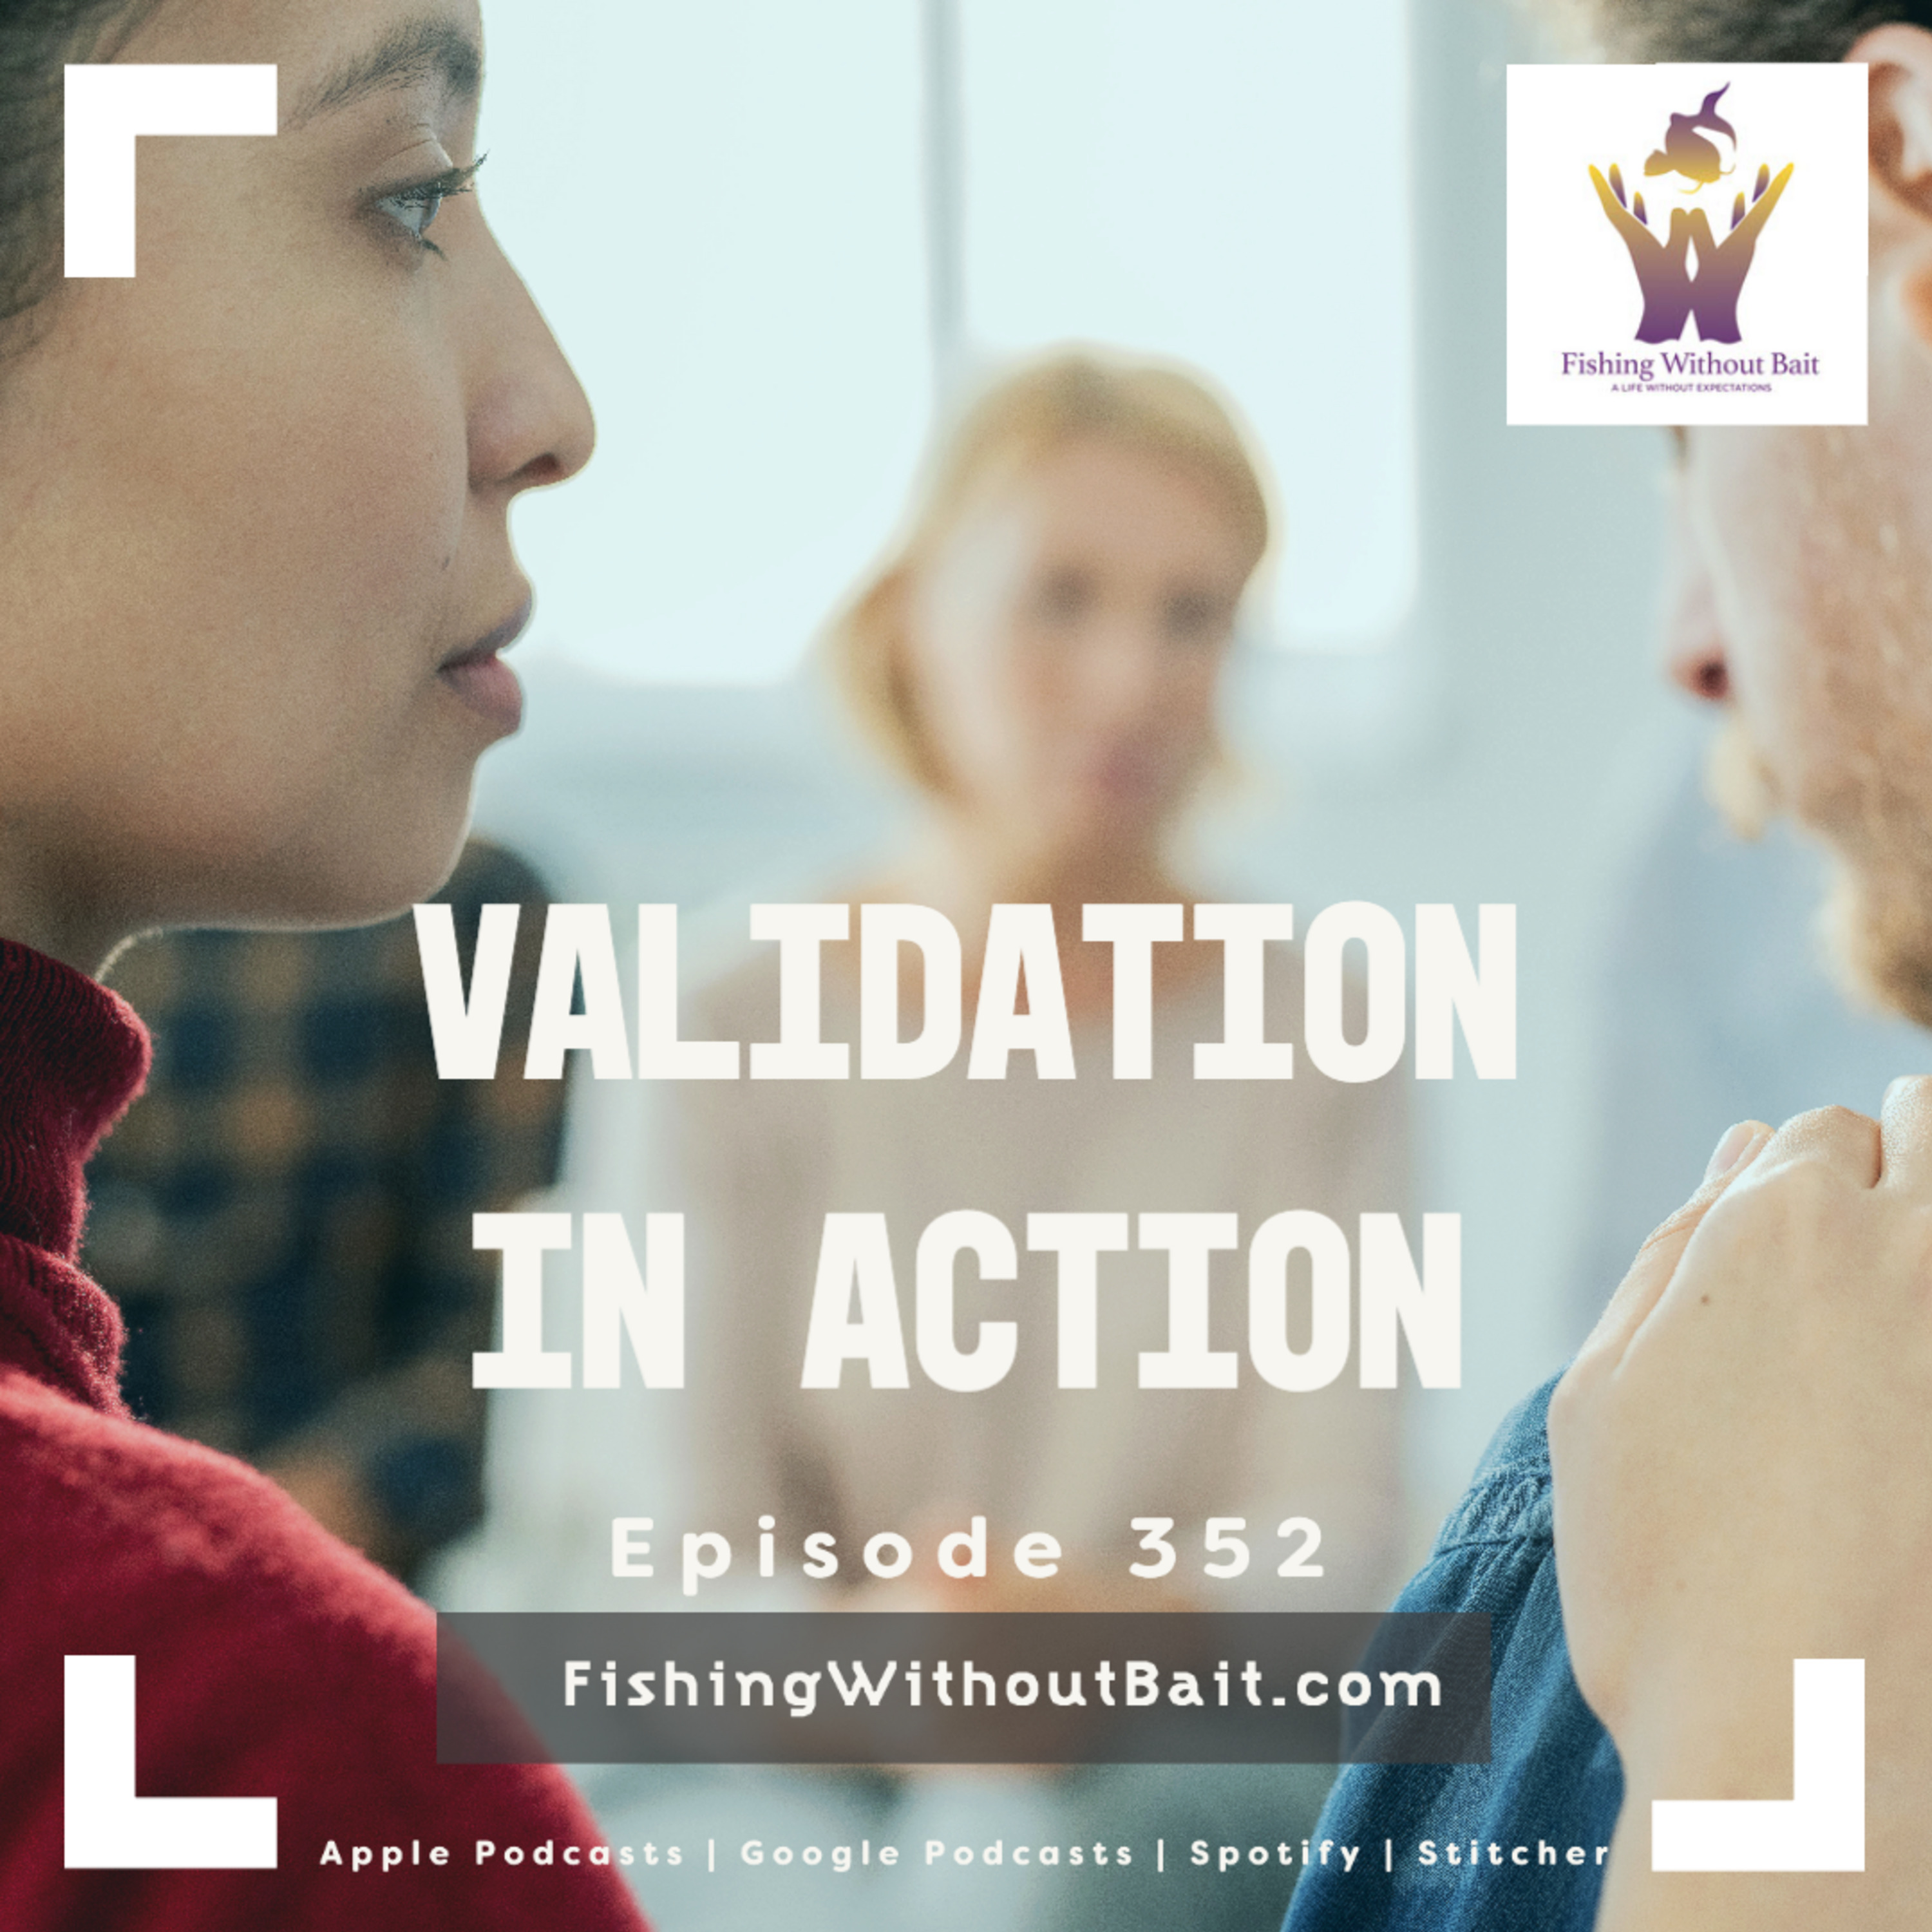 Fishing Without Bait 352: Validation in Action